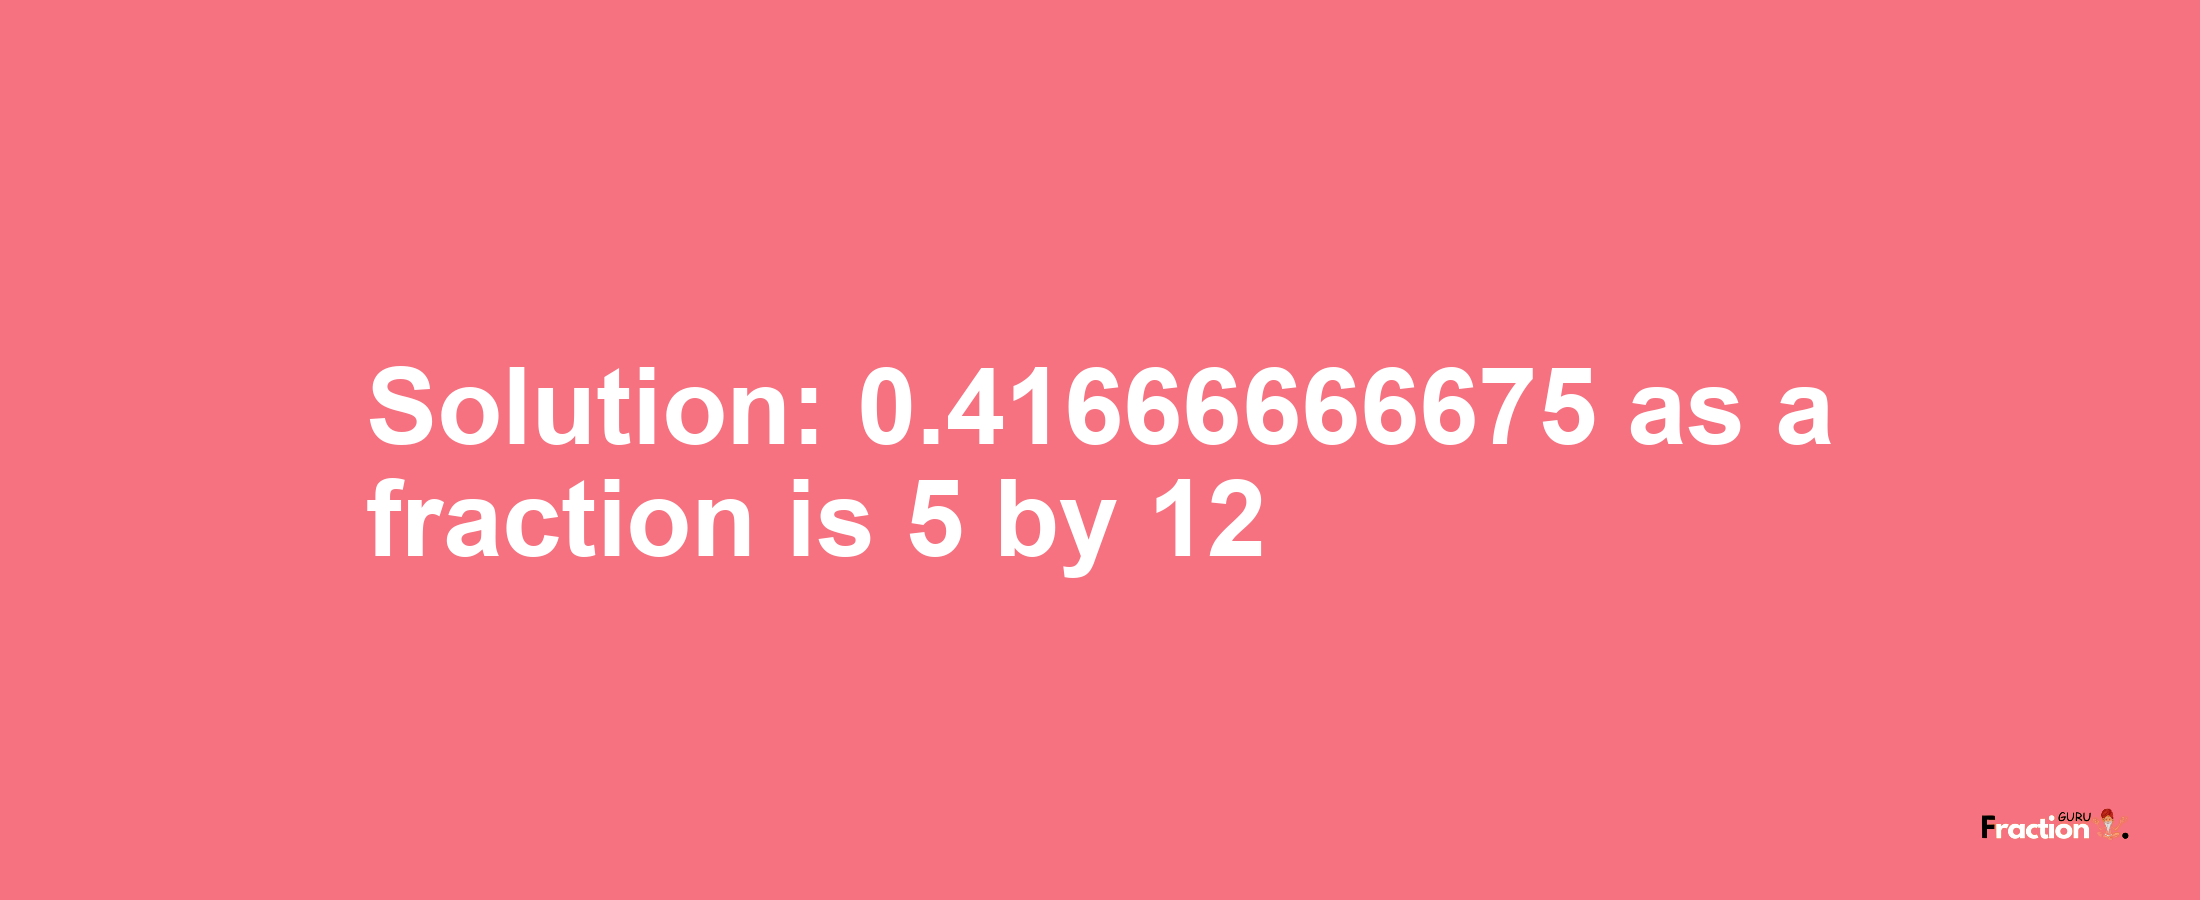 Solution:0.41666666675 as a fraction is 5/12